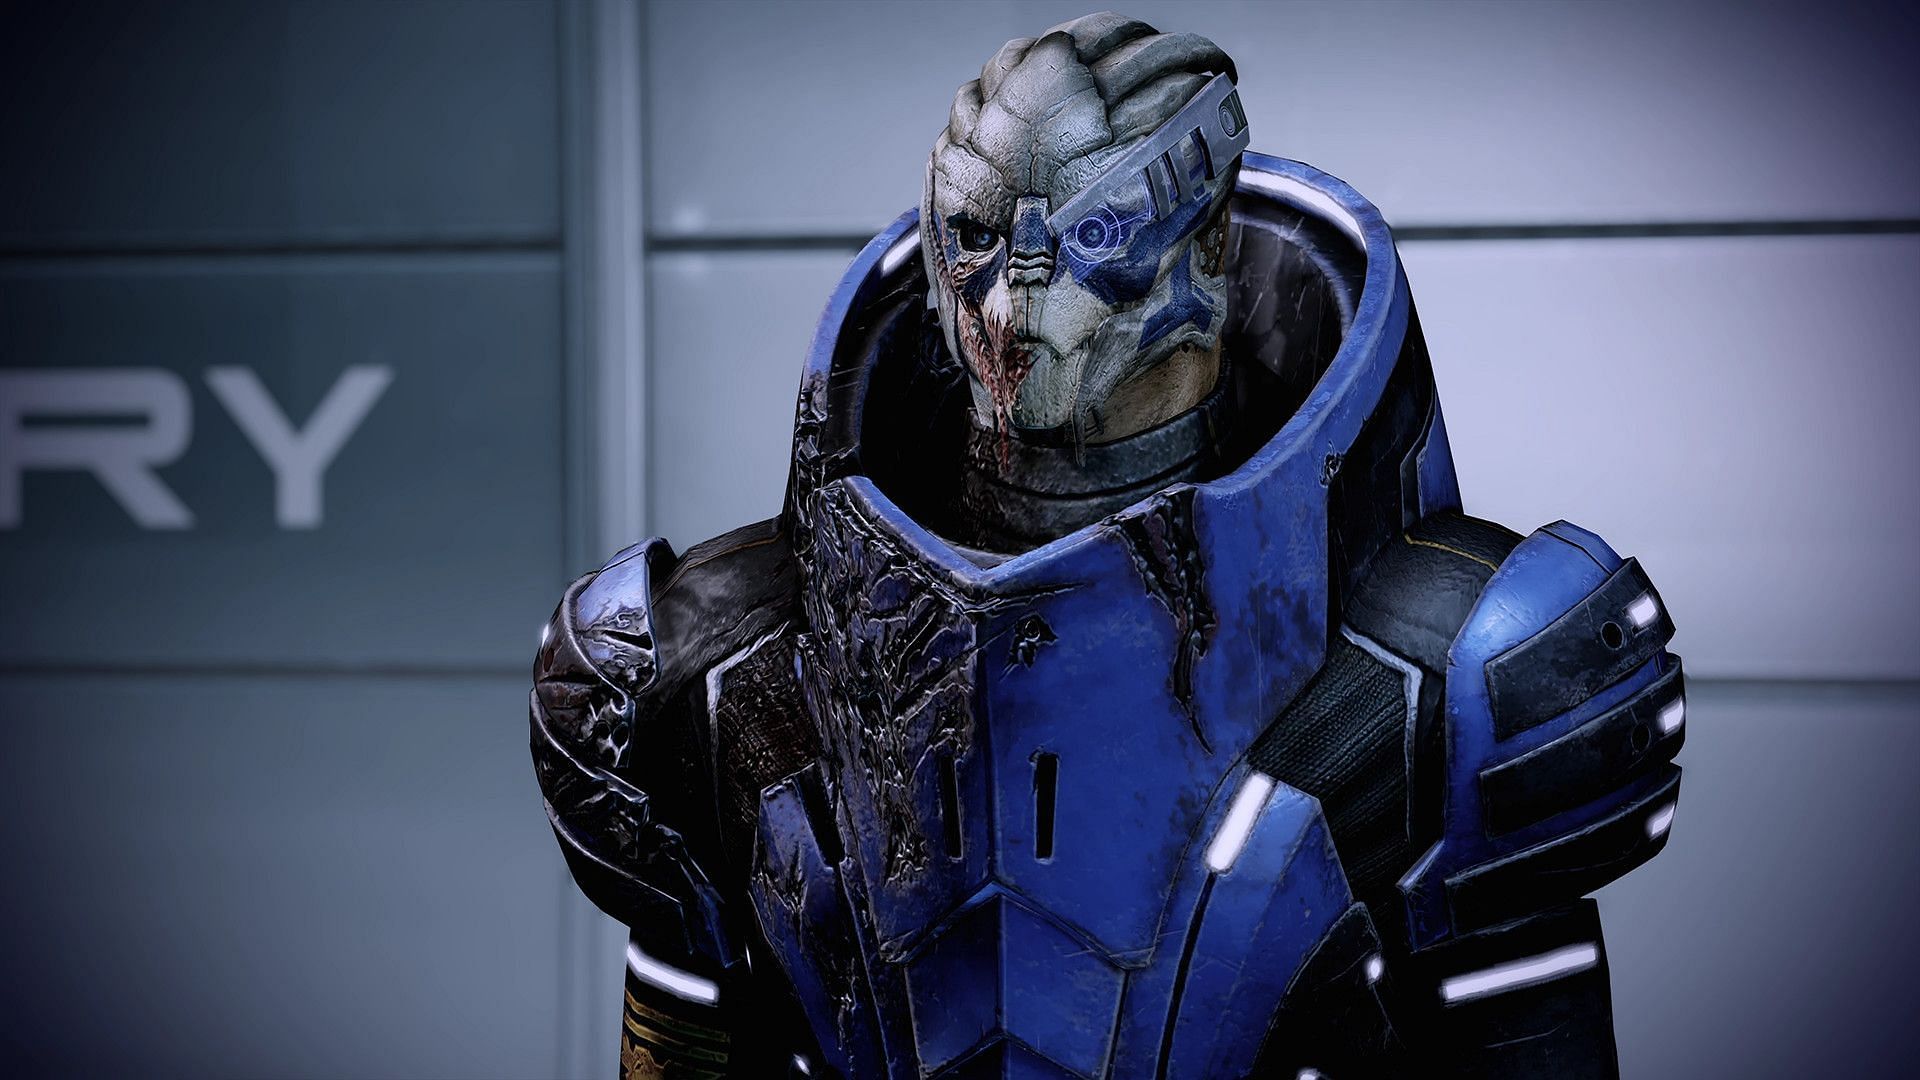 Experience the full Mass Effect saga during this Steam sale (Image via Electronic Arts)